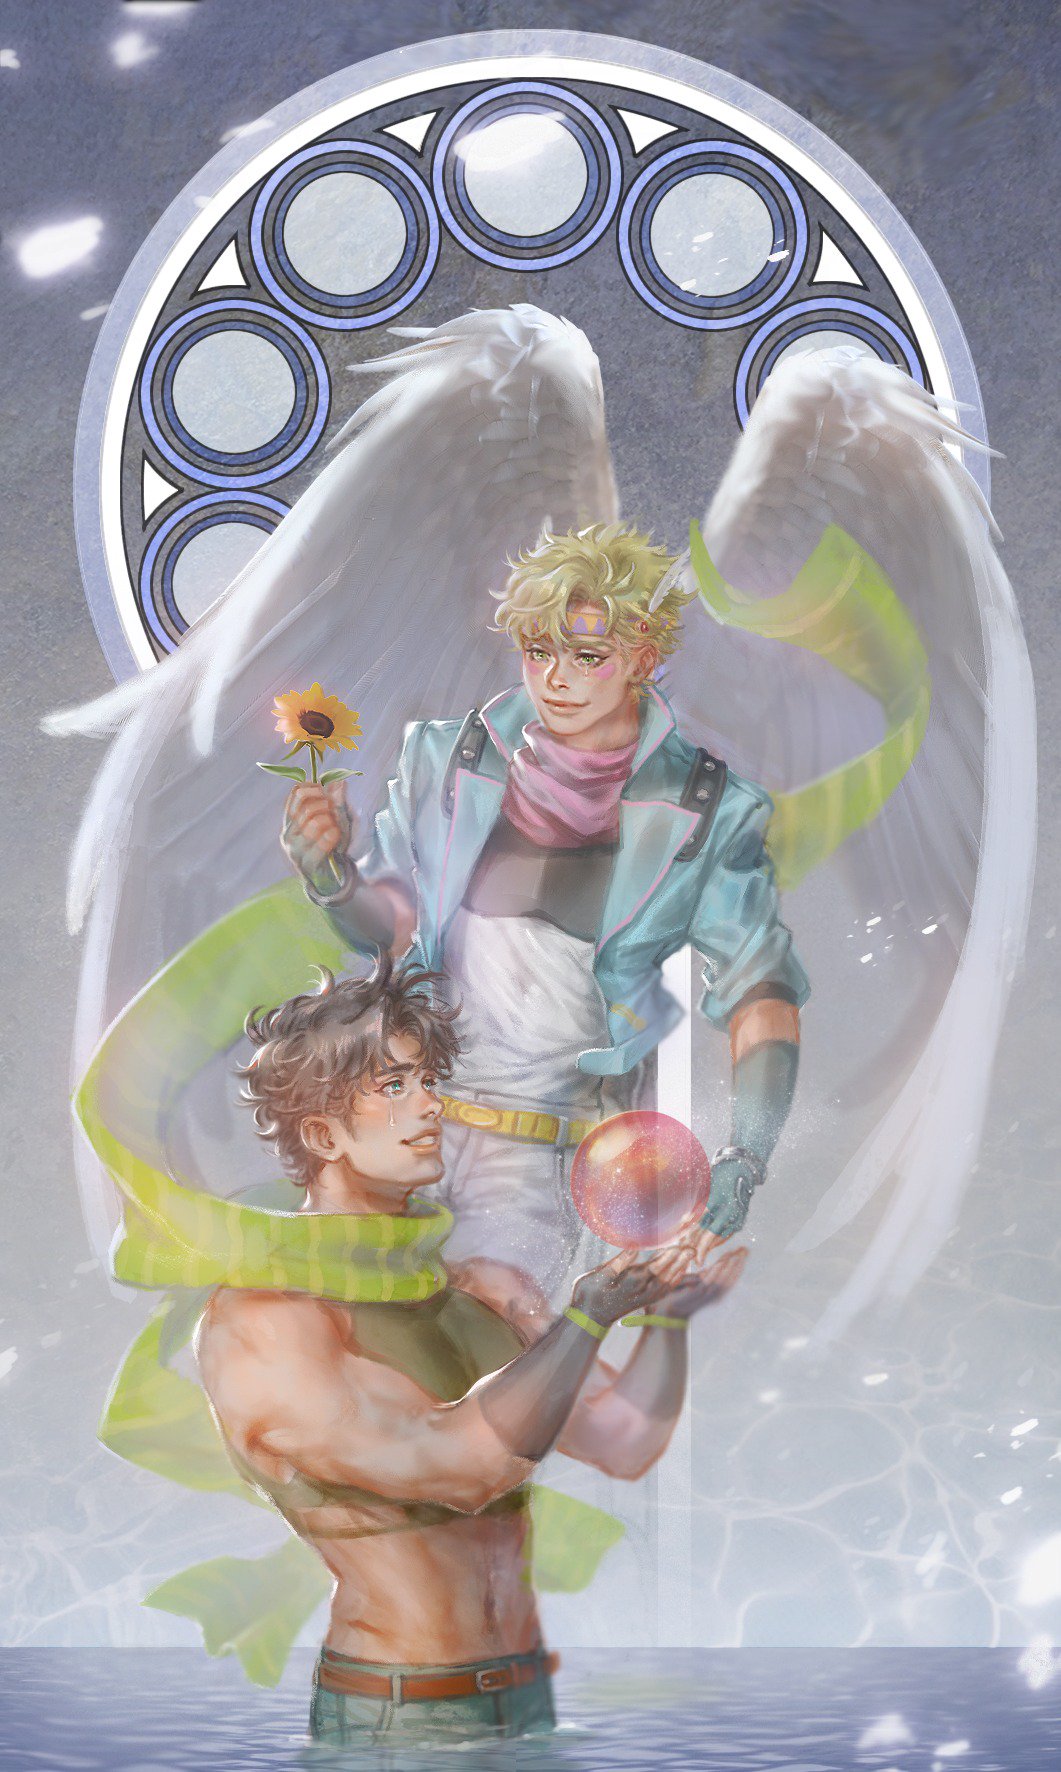 2boys abs angel_wings bare_shoulders battle_tendency blonde_hair blue_eyes brown_hair bubble caesar_anthonio_zeppeli chest_protector crop_top crying facial_mark feather_hair_ornament feathers fingerless_gloves gloves green_eyes green_scarf groin hair_ornament headband highres homil22 jojo_no_kimyou_na_bouken joseph_joestar joseph_joestar_(young) male_focus midriff multiple_boys partially_submerged scarf stained_glass striped striped_scarf tears triangle_print wings